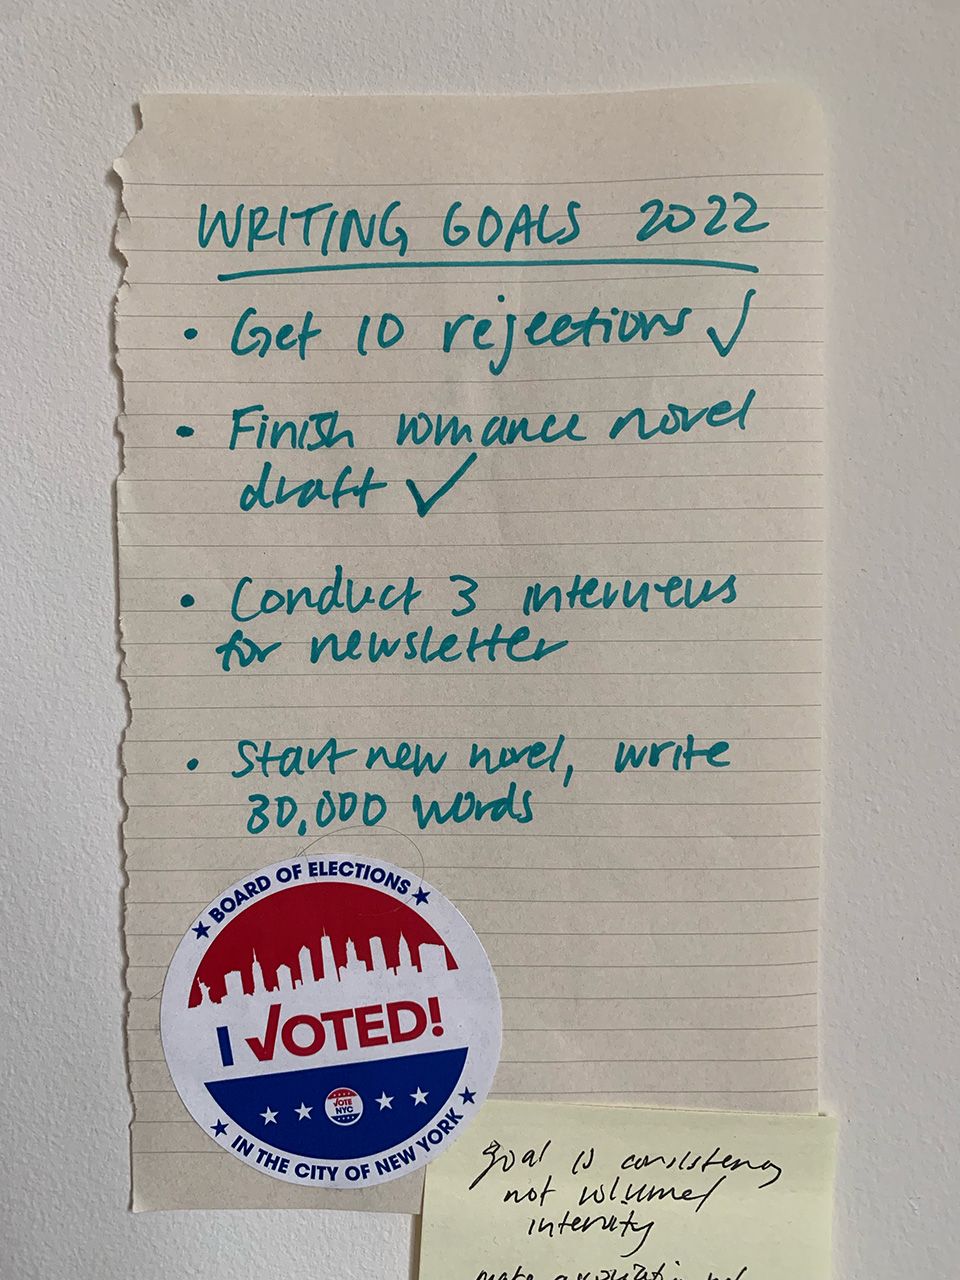 A torn out page of a Moleskine journal that lists Nicole's 2022 writing goals: get 10 rejections, finish romance novel draft, conduct 3 interviews for newsletter, start new novel and write 30,000 words.